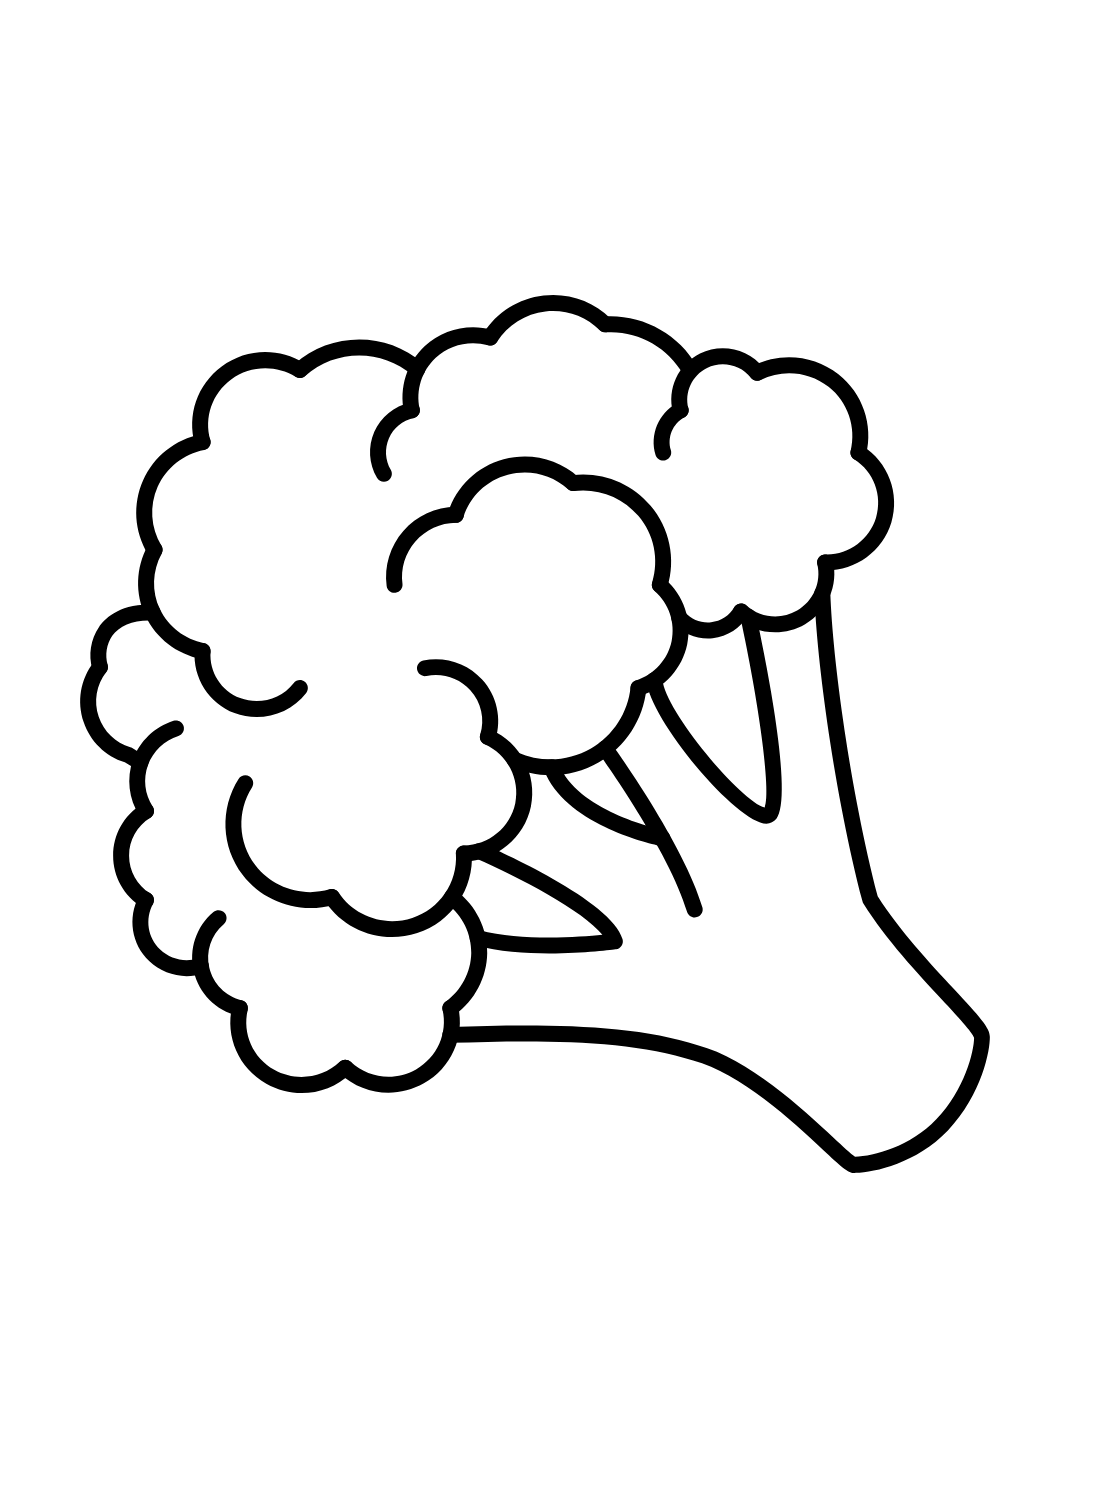 Printable Broccoli Coloring Pages